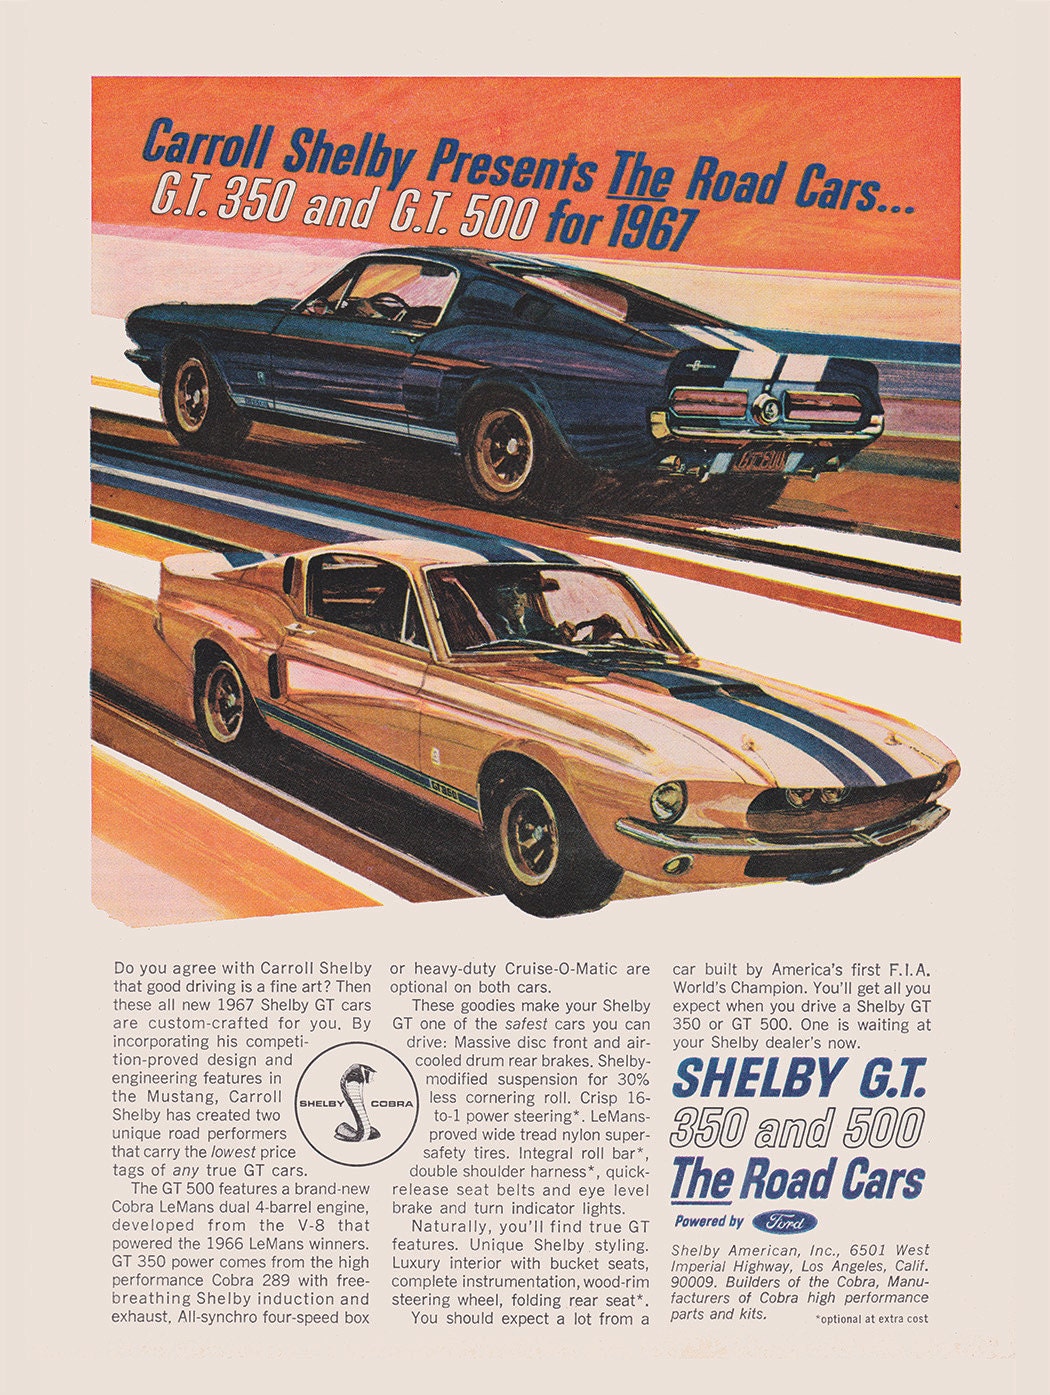 Shelby Mustang GT500 Print Ad Restored and enlarged reprint | Etsy